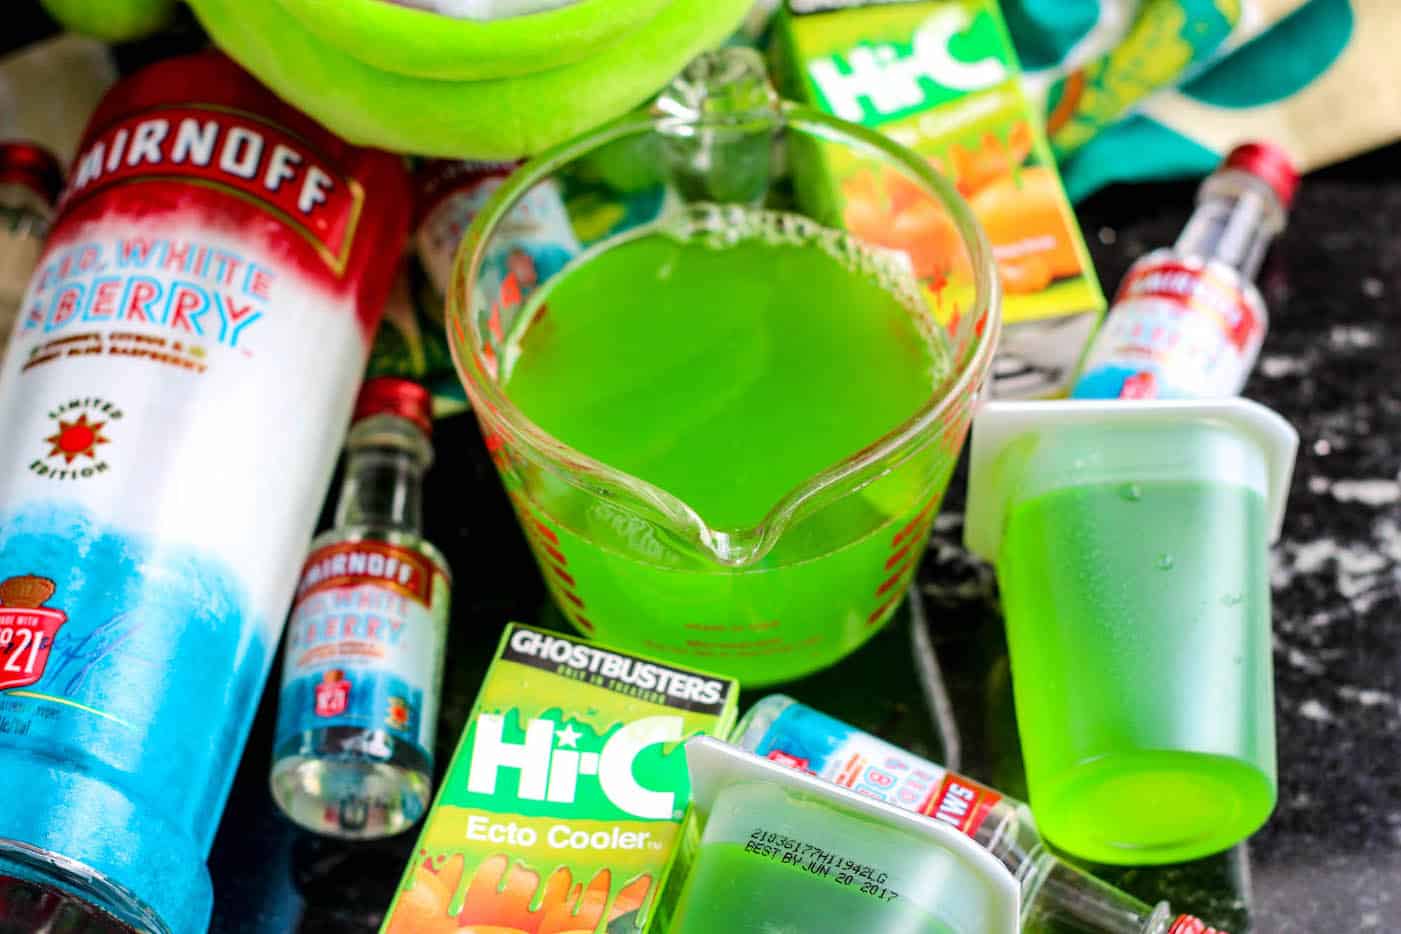 Smirnoff vodka, Hi-C Ecto Cooler, and lemon lime jello in a measuring cup